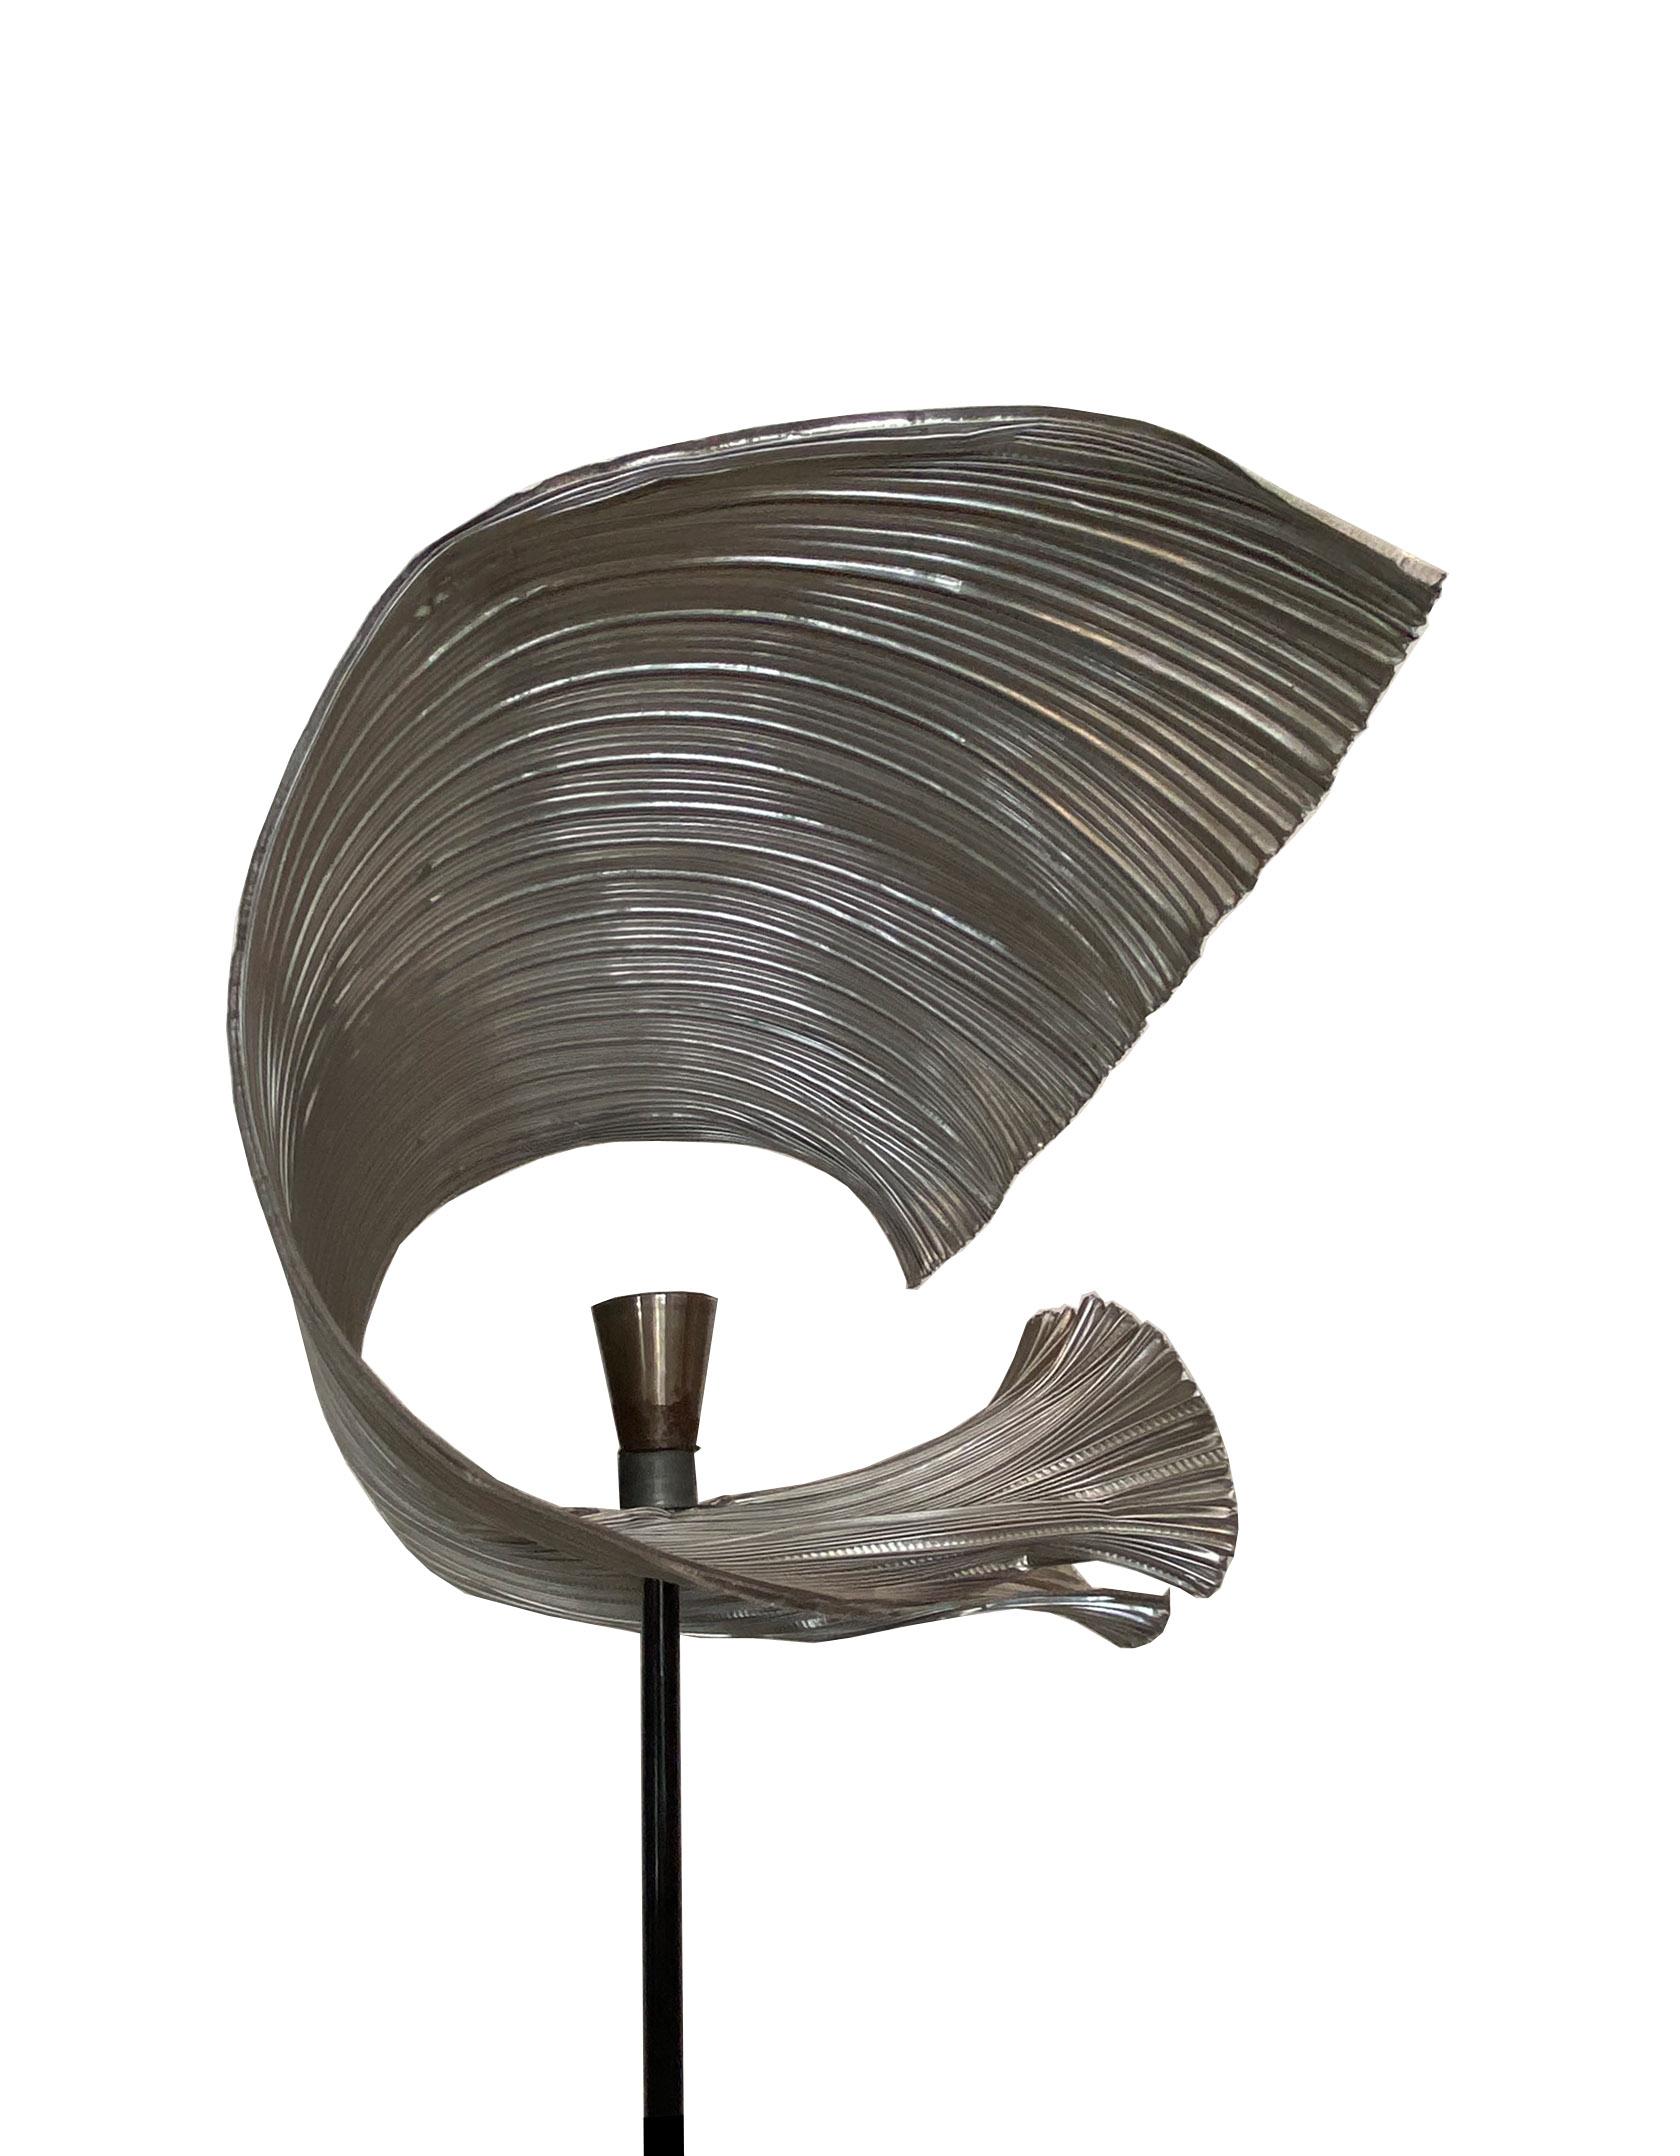 Magnificent floor / sculpture lamp by the Neapolitan artist Michele Iodice, made of corrugated aluminum modeled evoking marine forms.
Michele Iodice was born in 1956 in Naples, where he lives and works.

An anomalous artist, not placed in a